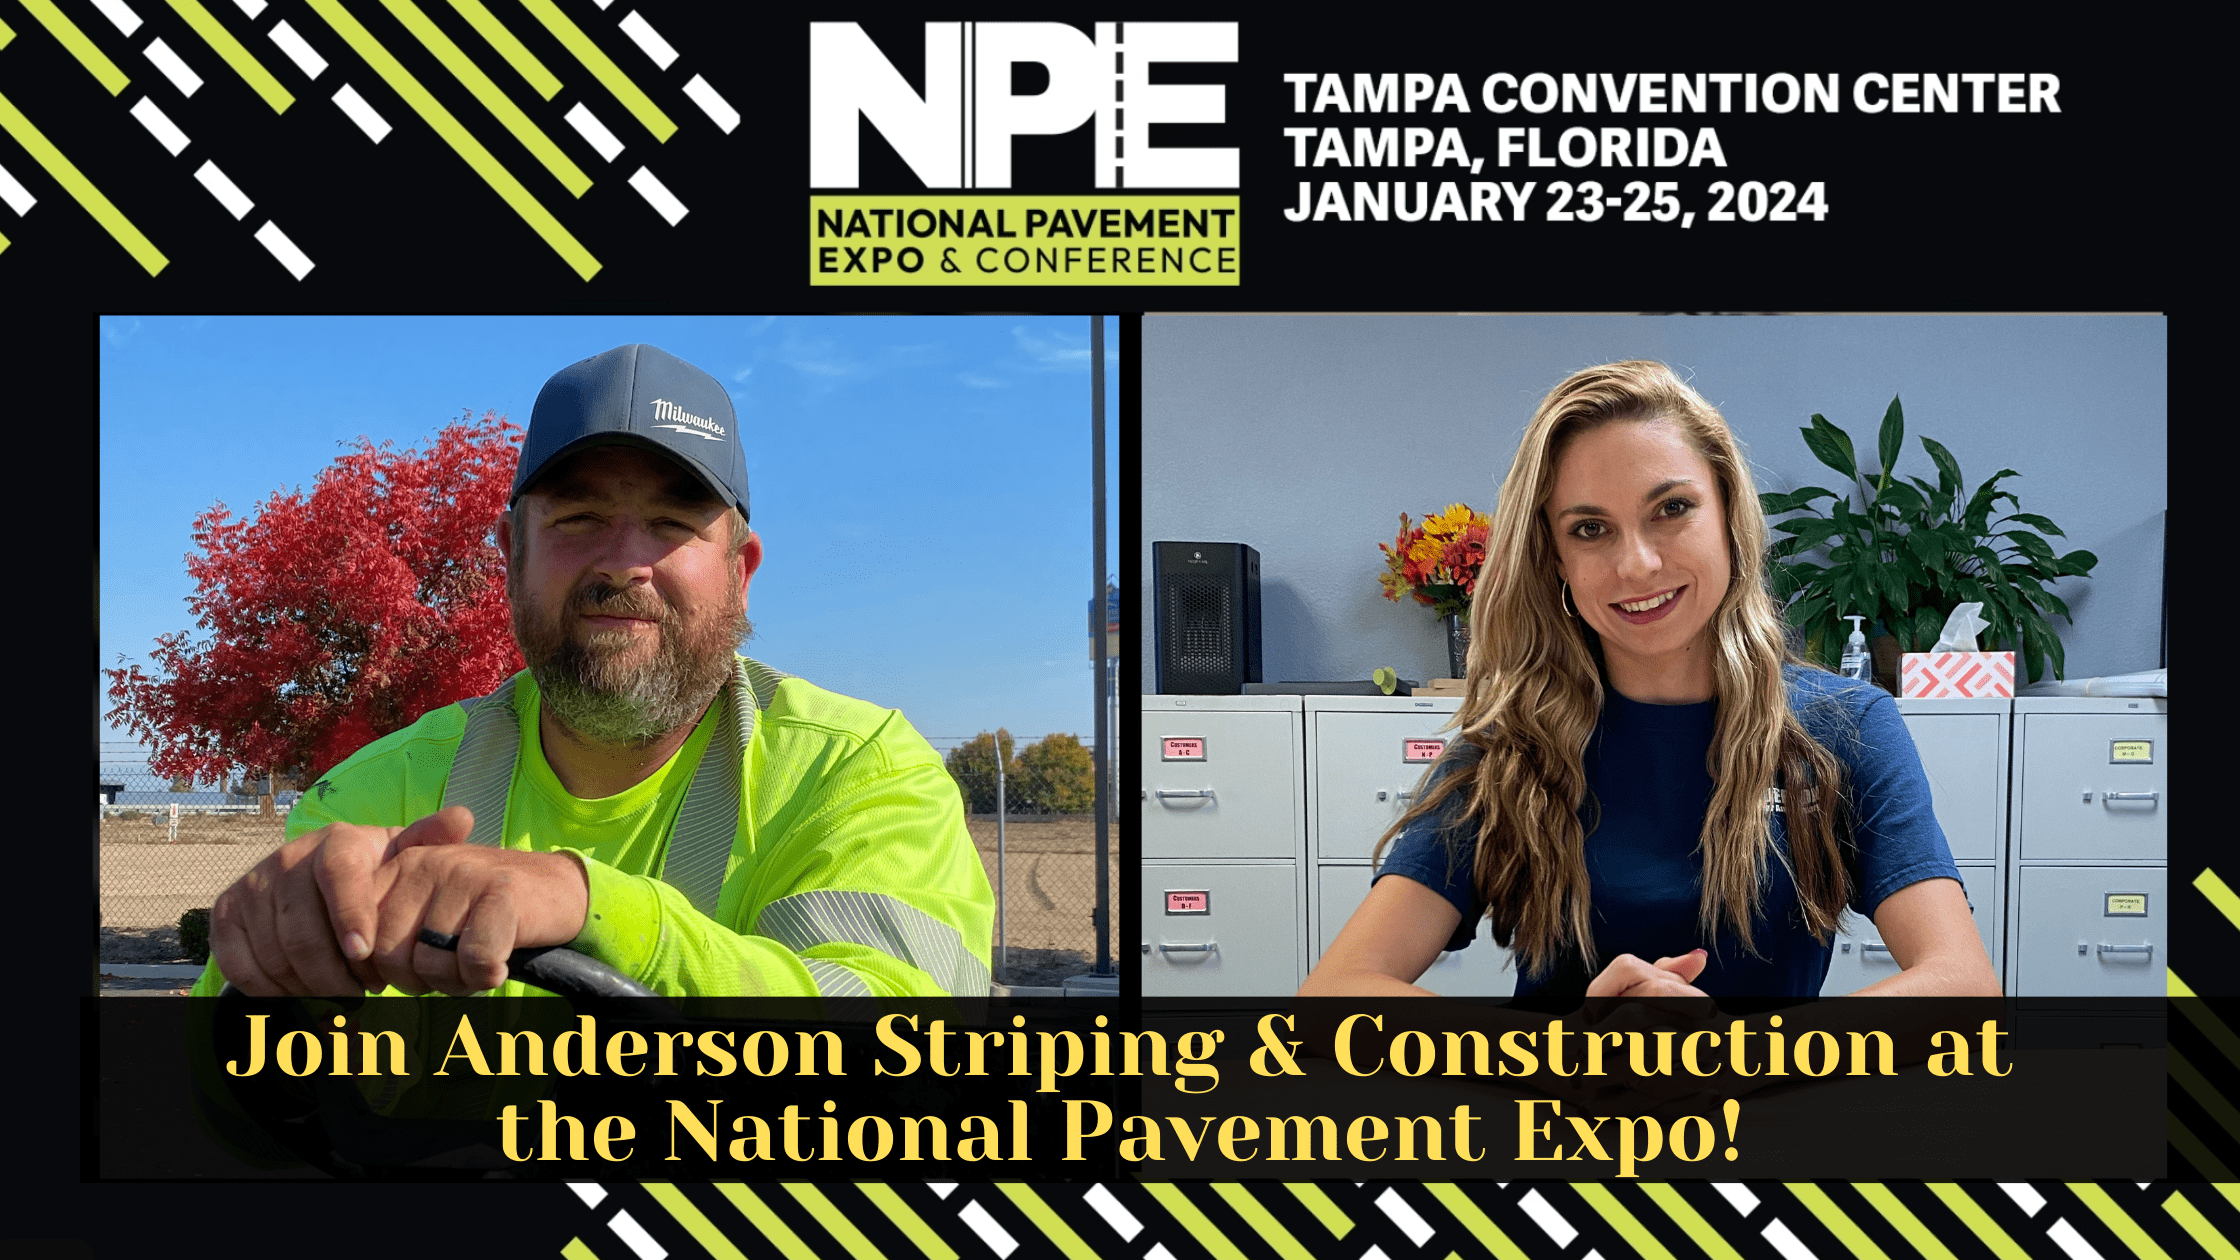 Join Anderson Striping at the 2024 National Pavement Expo! Anderson